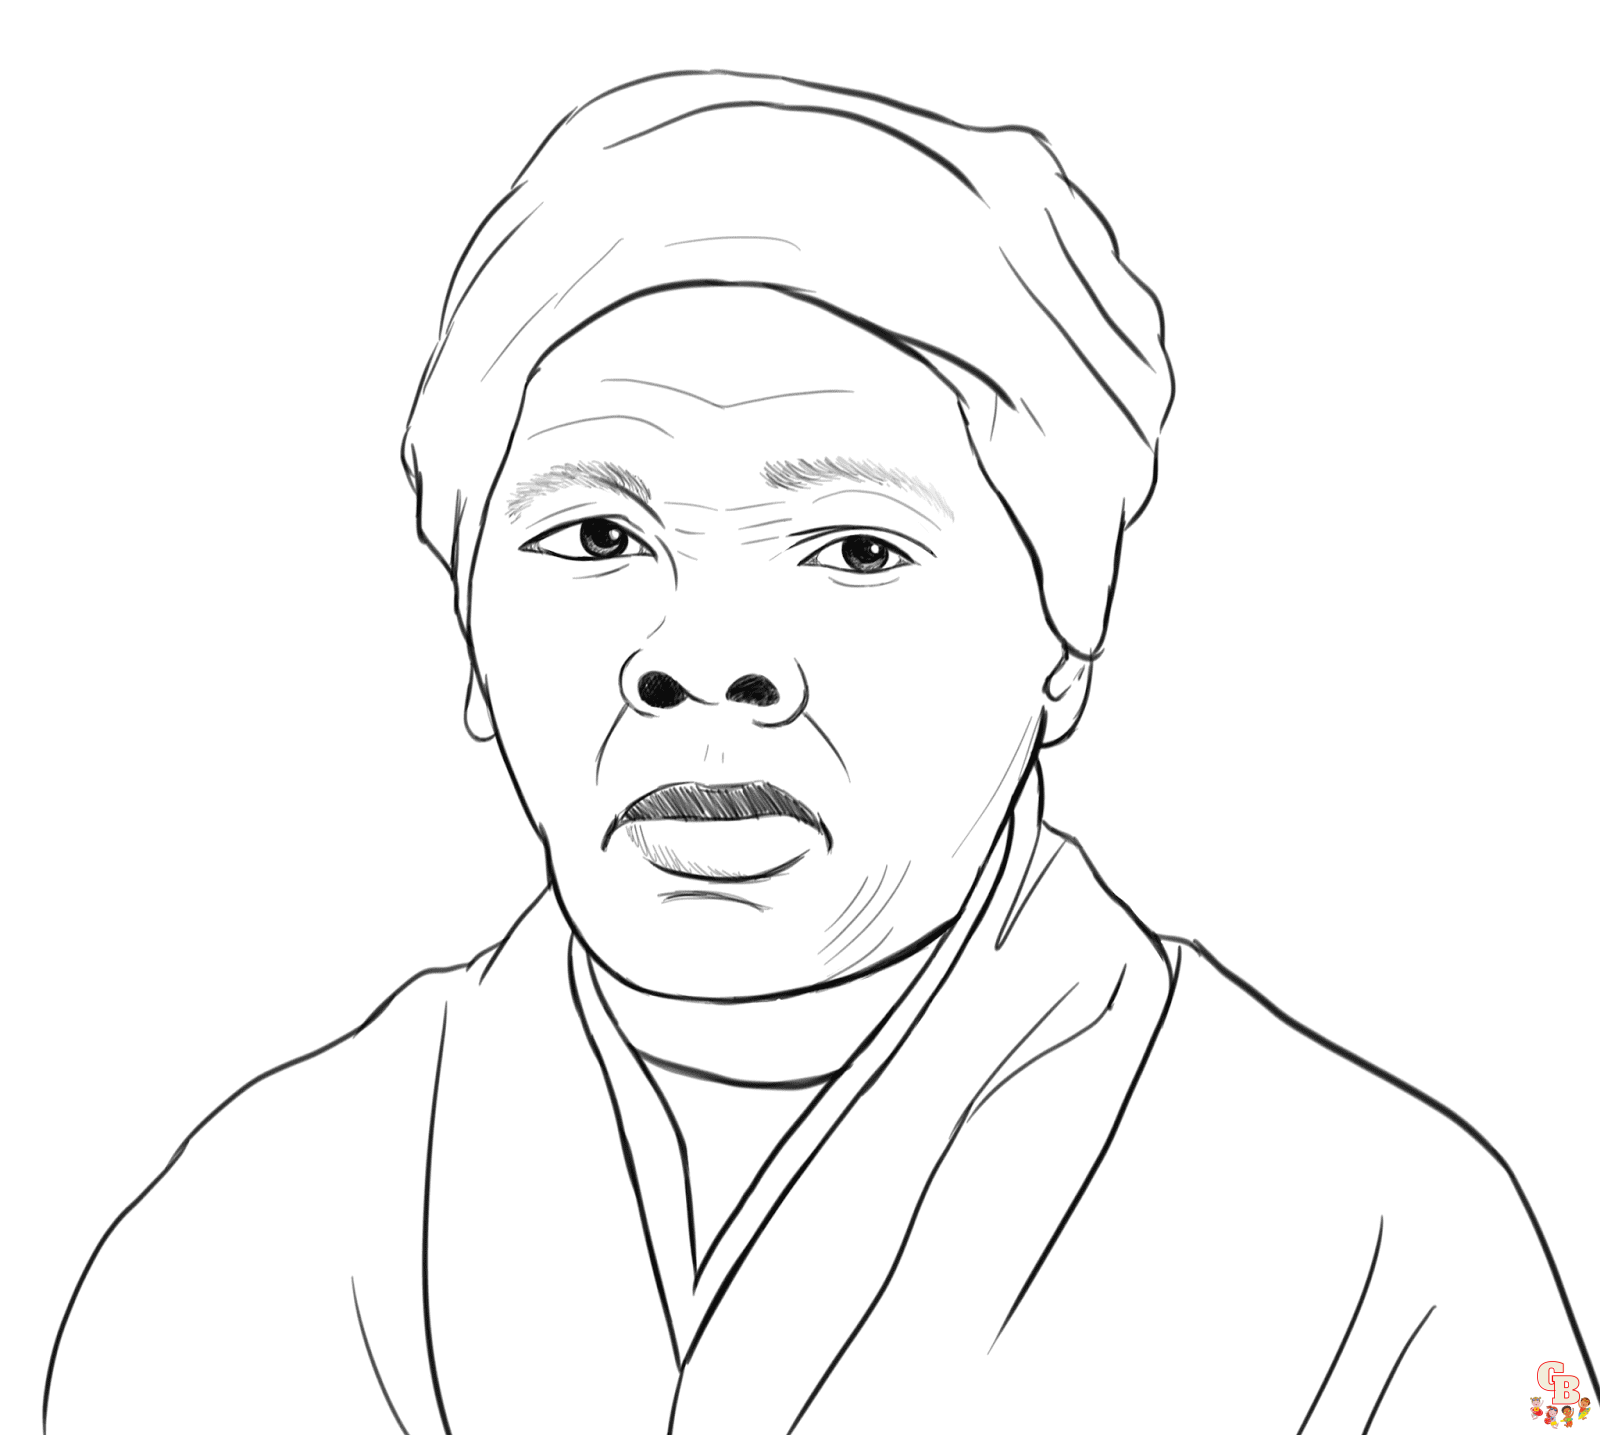 Harriet Tubman coloring pages free